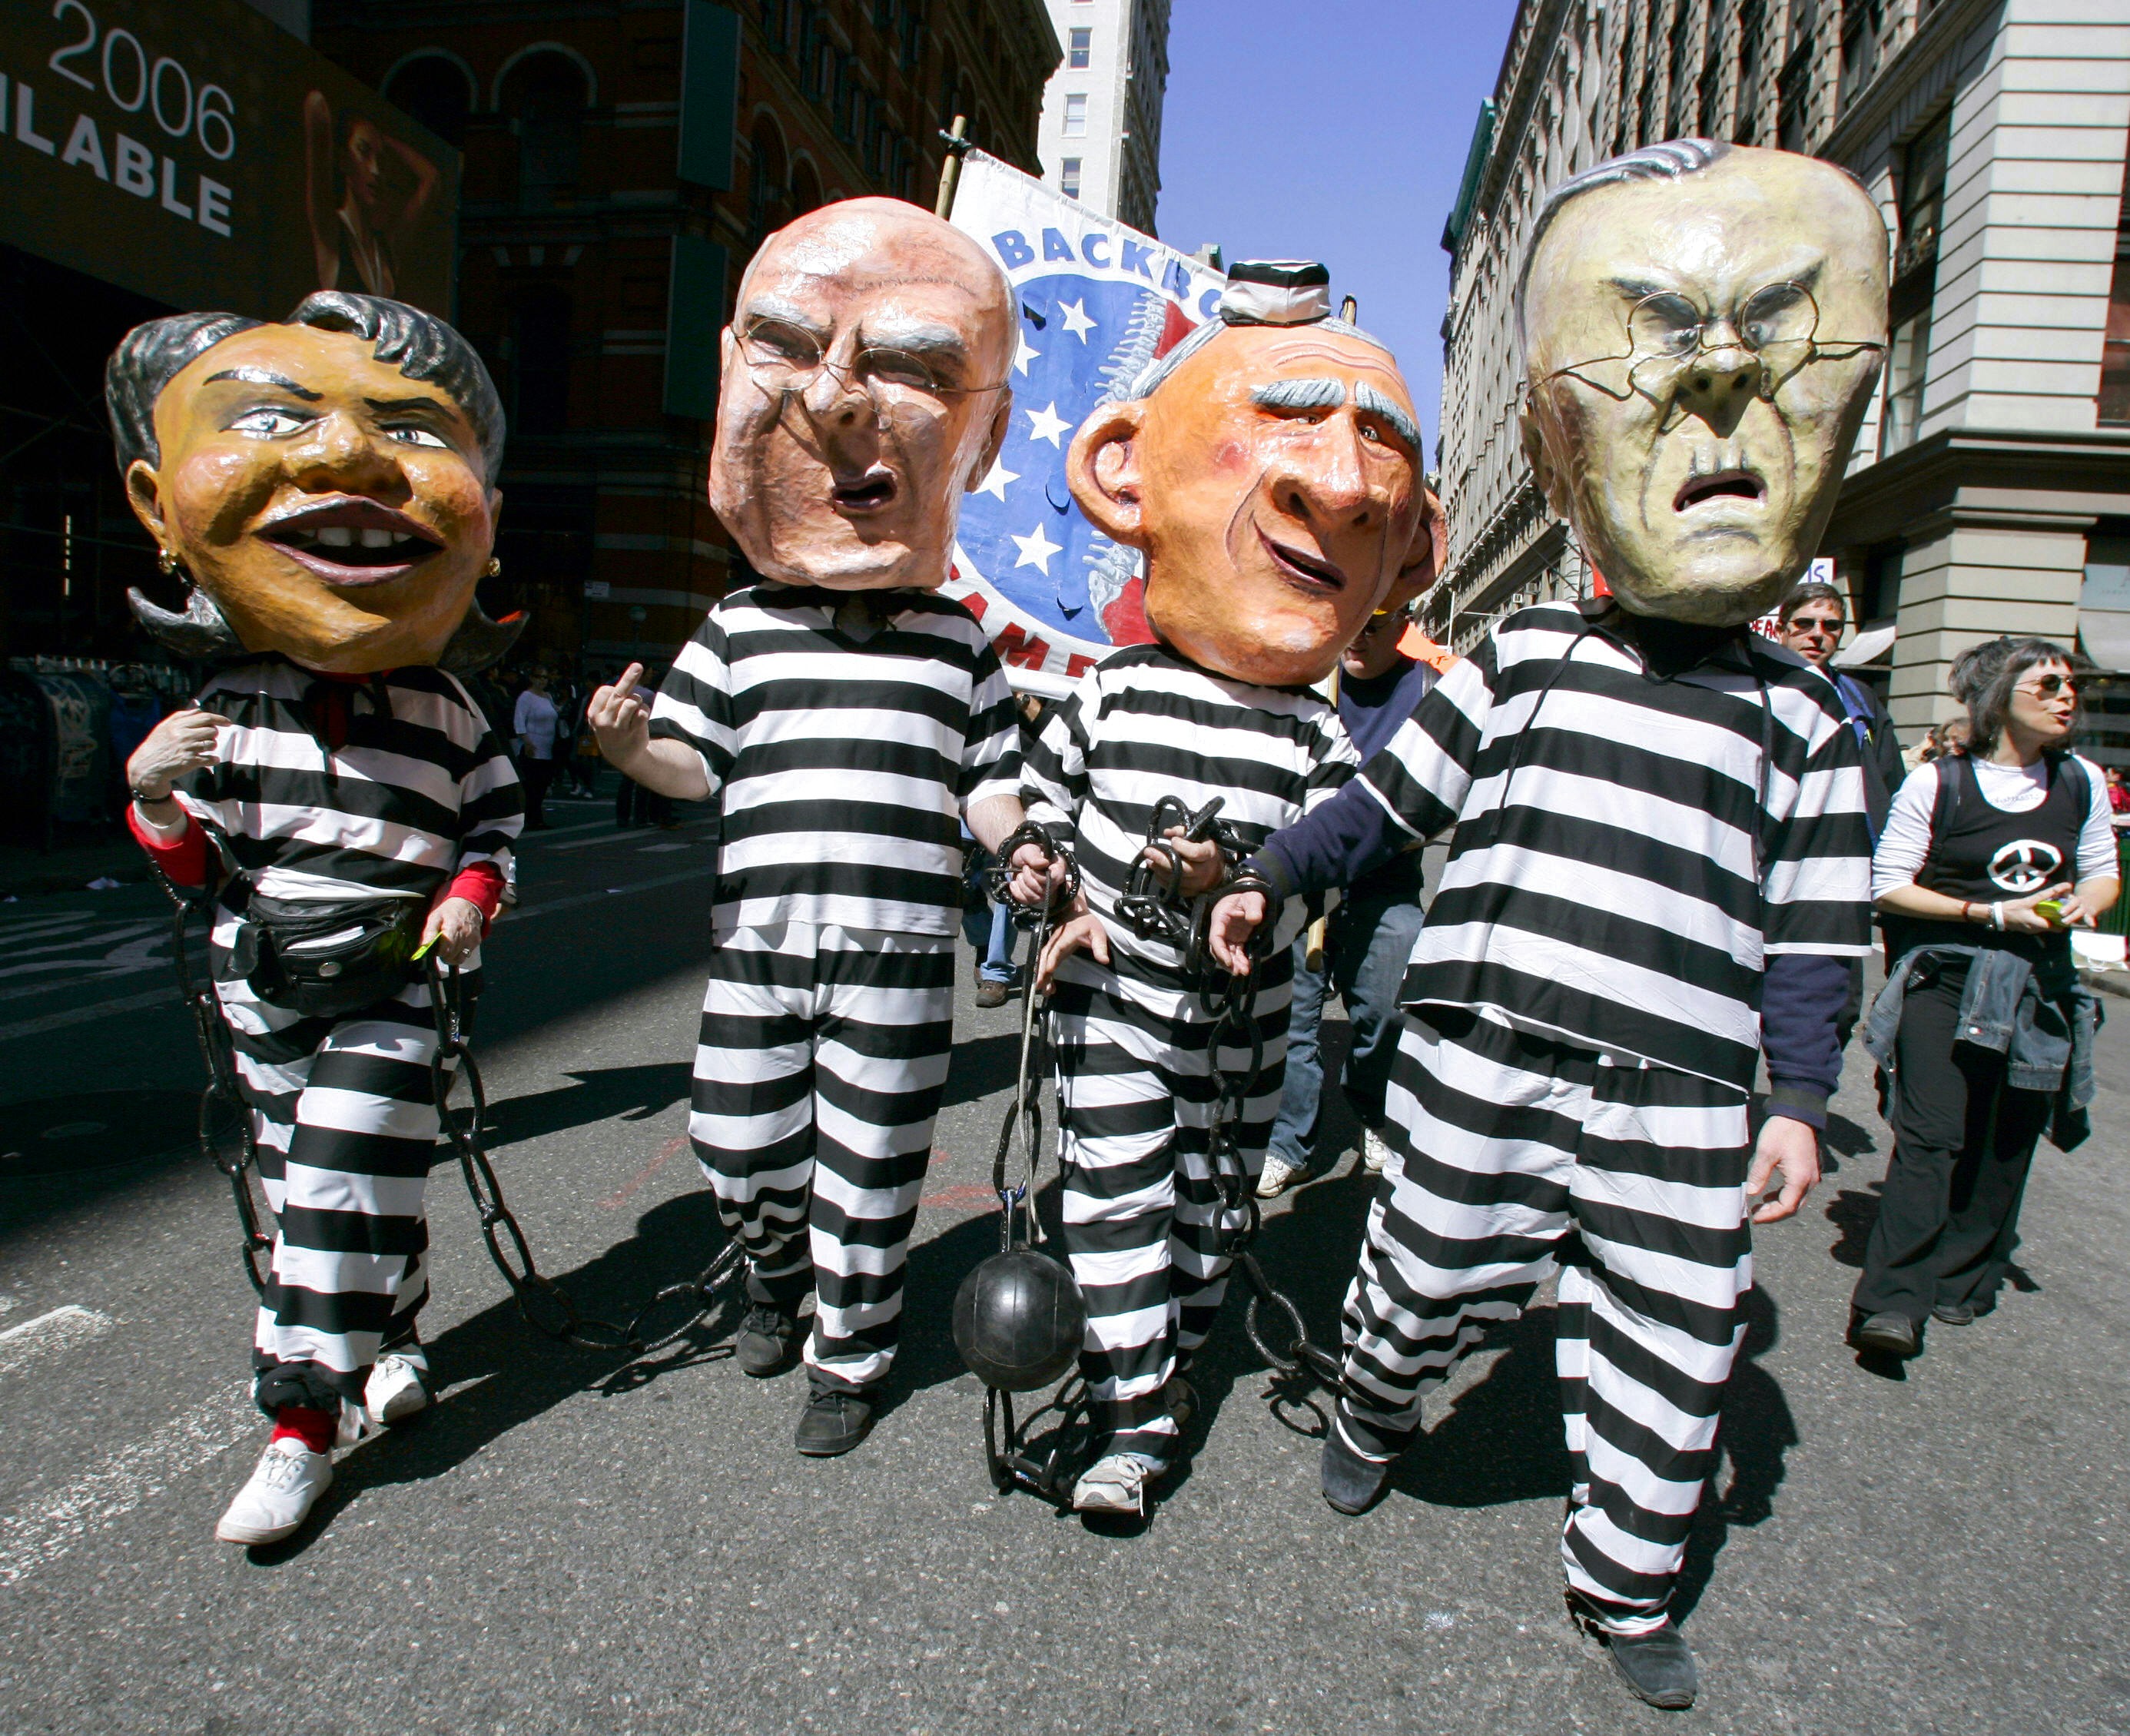 New York, UNITED STATES:  Anti-war protestors dressed as US Secretary of State Condoleezza Rice, Vice President Dick Cheney, President George W. Bush and Defense Secretary Donald Rumsfeld in prison garb march down Broadway on their way to lower Manhattan 29 April 2006 during the March for Peace, Justice and Democracy. The march was just one of the many protests all over the country calling for an end to the war in Iraq.      AFP PHOTO/Timothy A. CLARY  (Photo credit should read TIMOTHY A. CLARY/AFP via Getty Images)